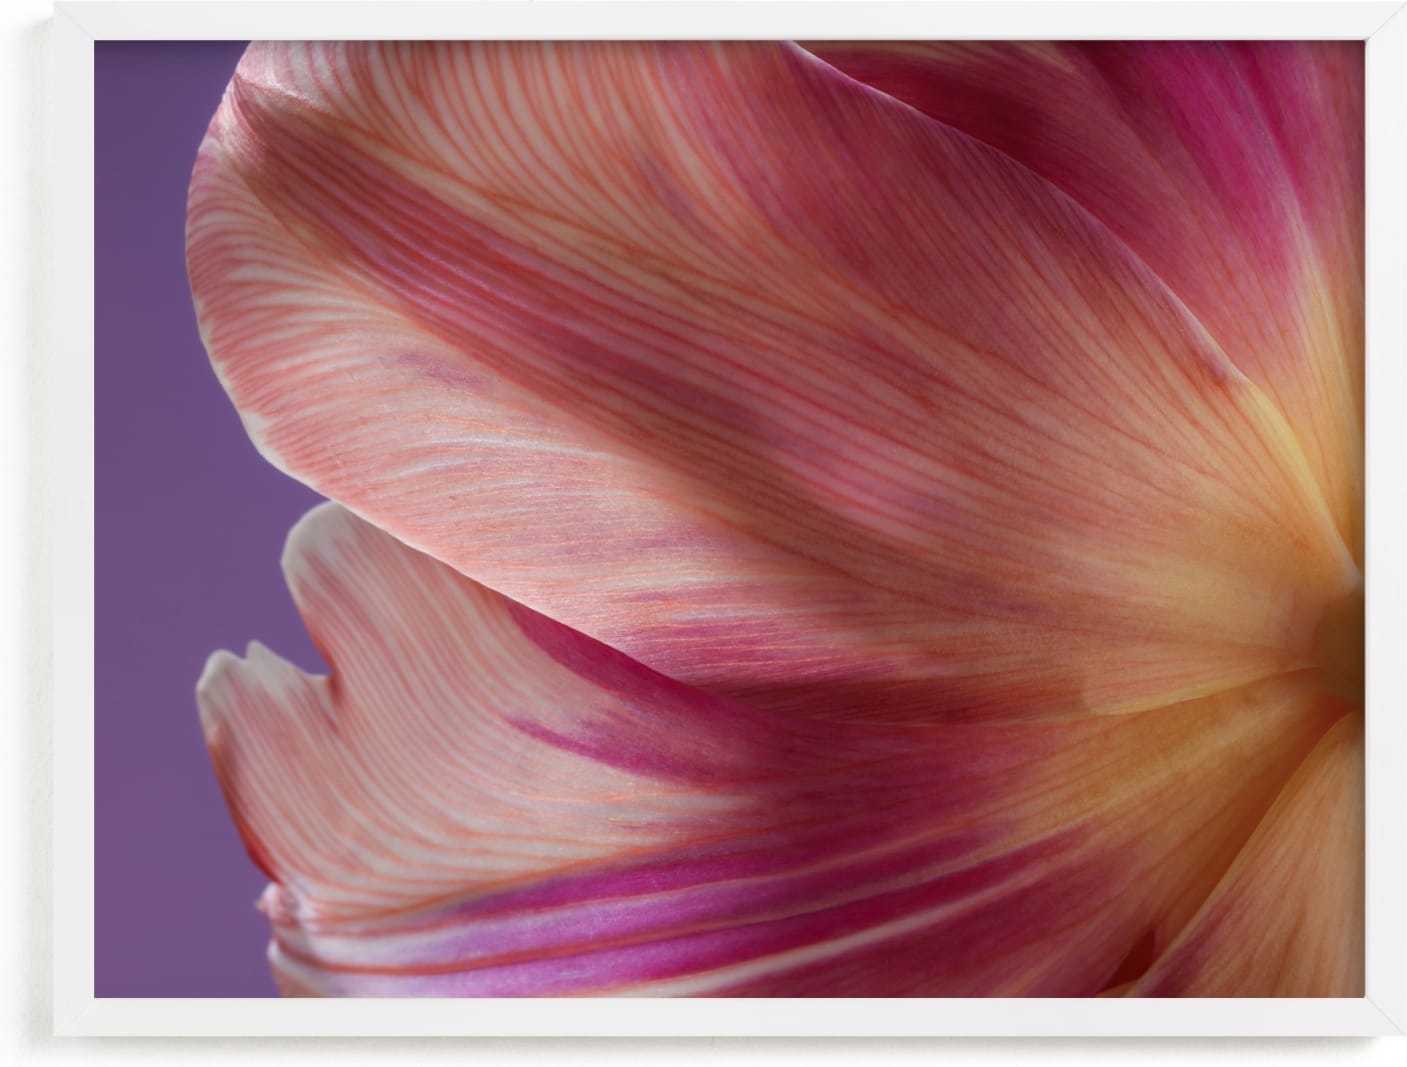 This is a purple, pink art by Elena Kulikova called Parrot Tulip.